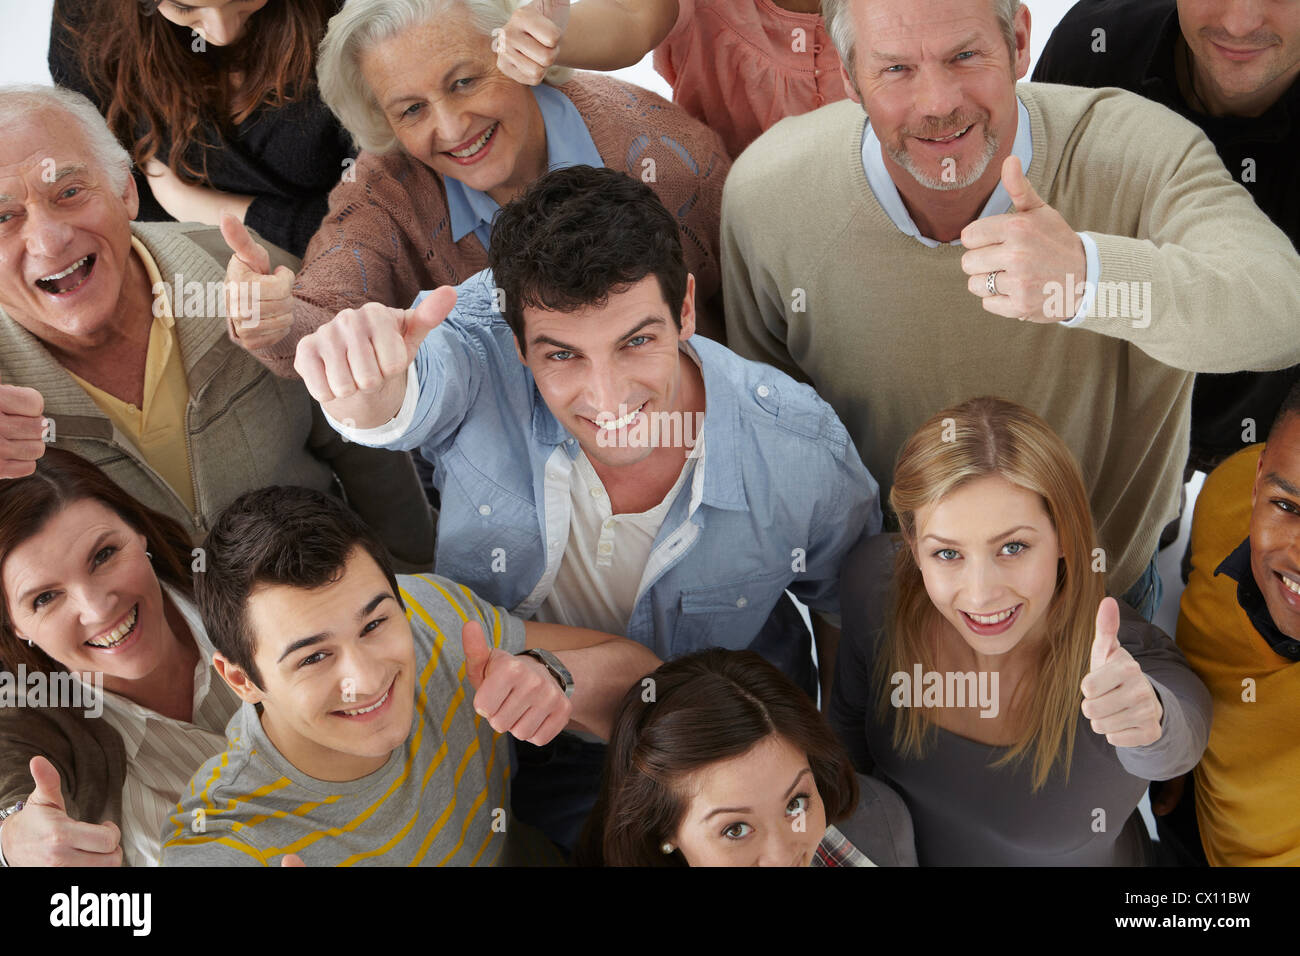 Group of people looking at camera with thumbs up, high angle Stock Photo